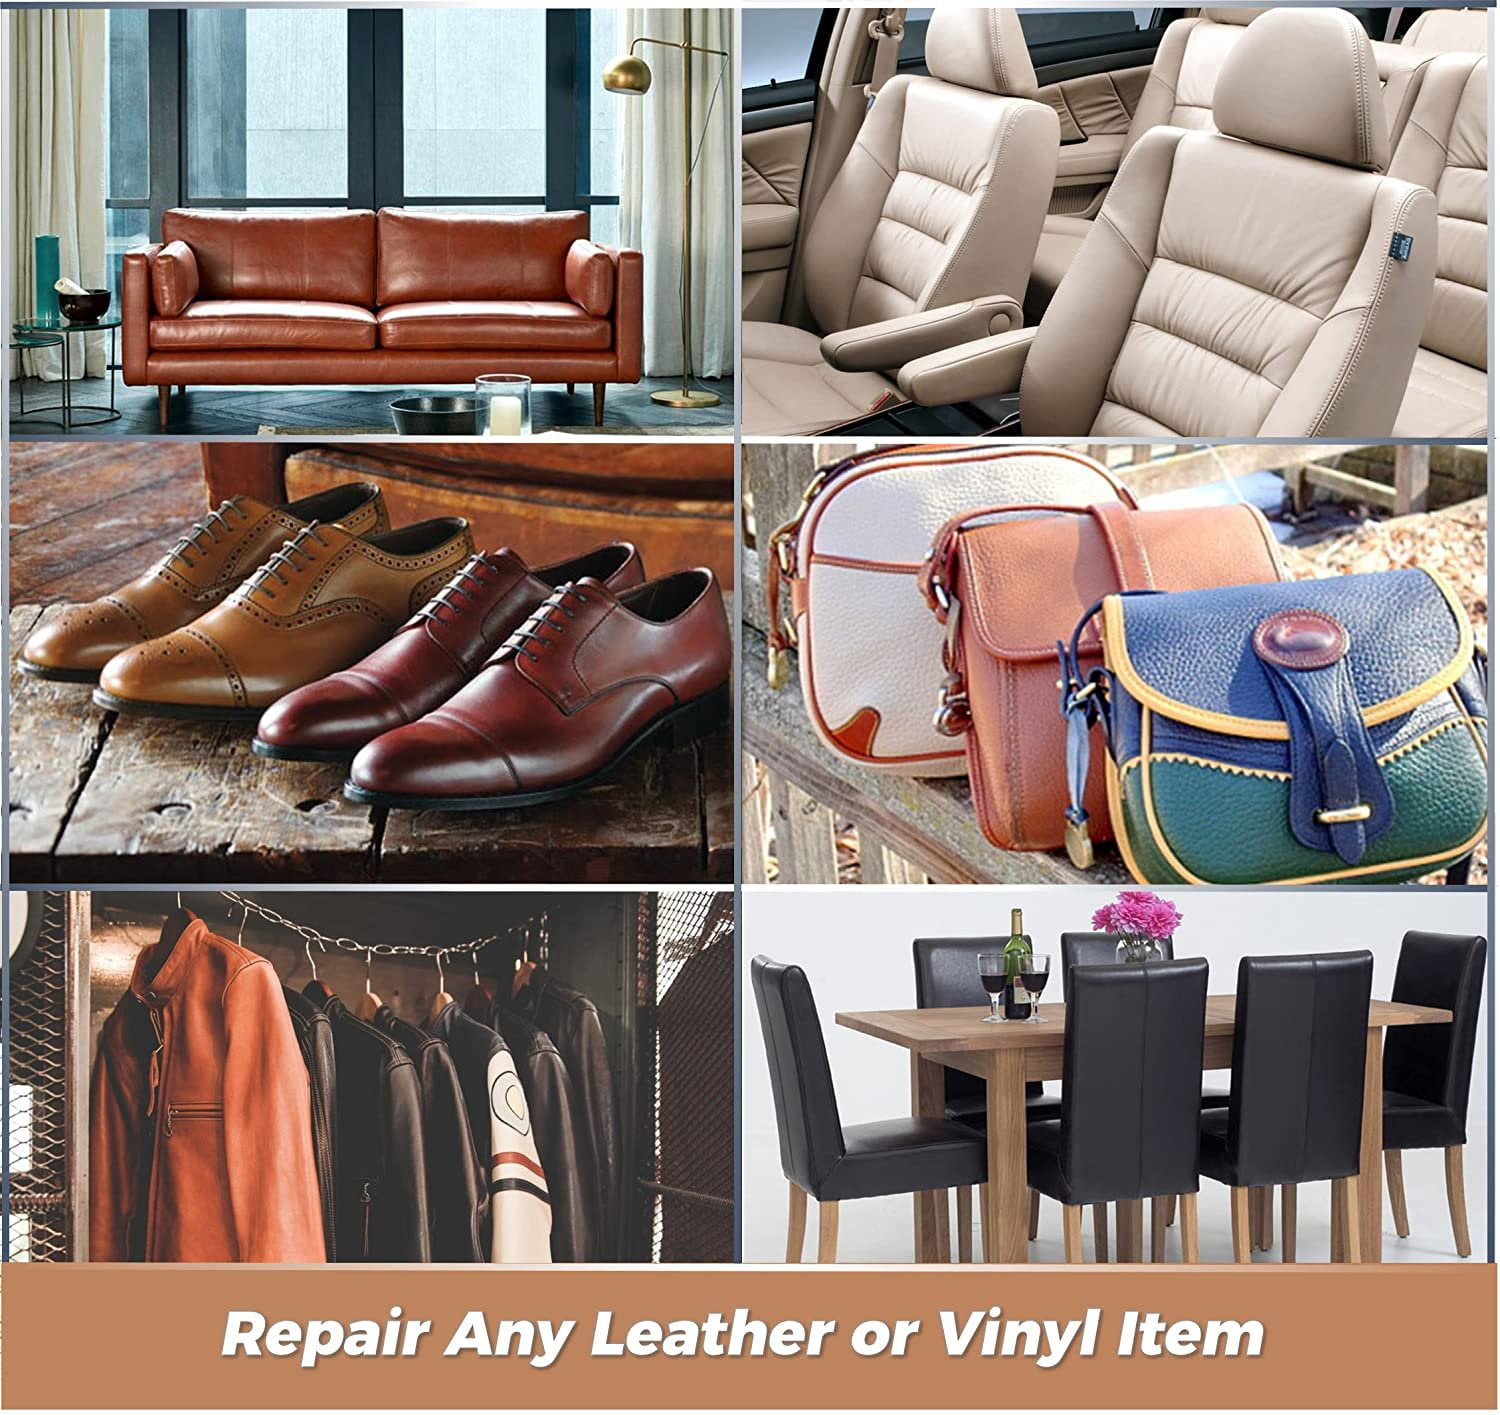 How to clean leather bags at home | Guide to leather cleaning